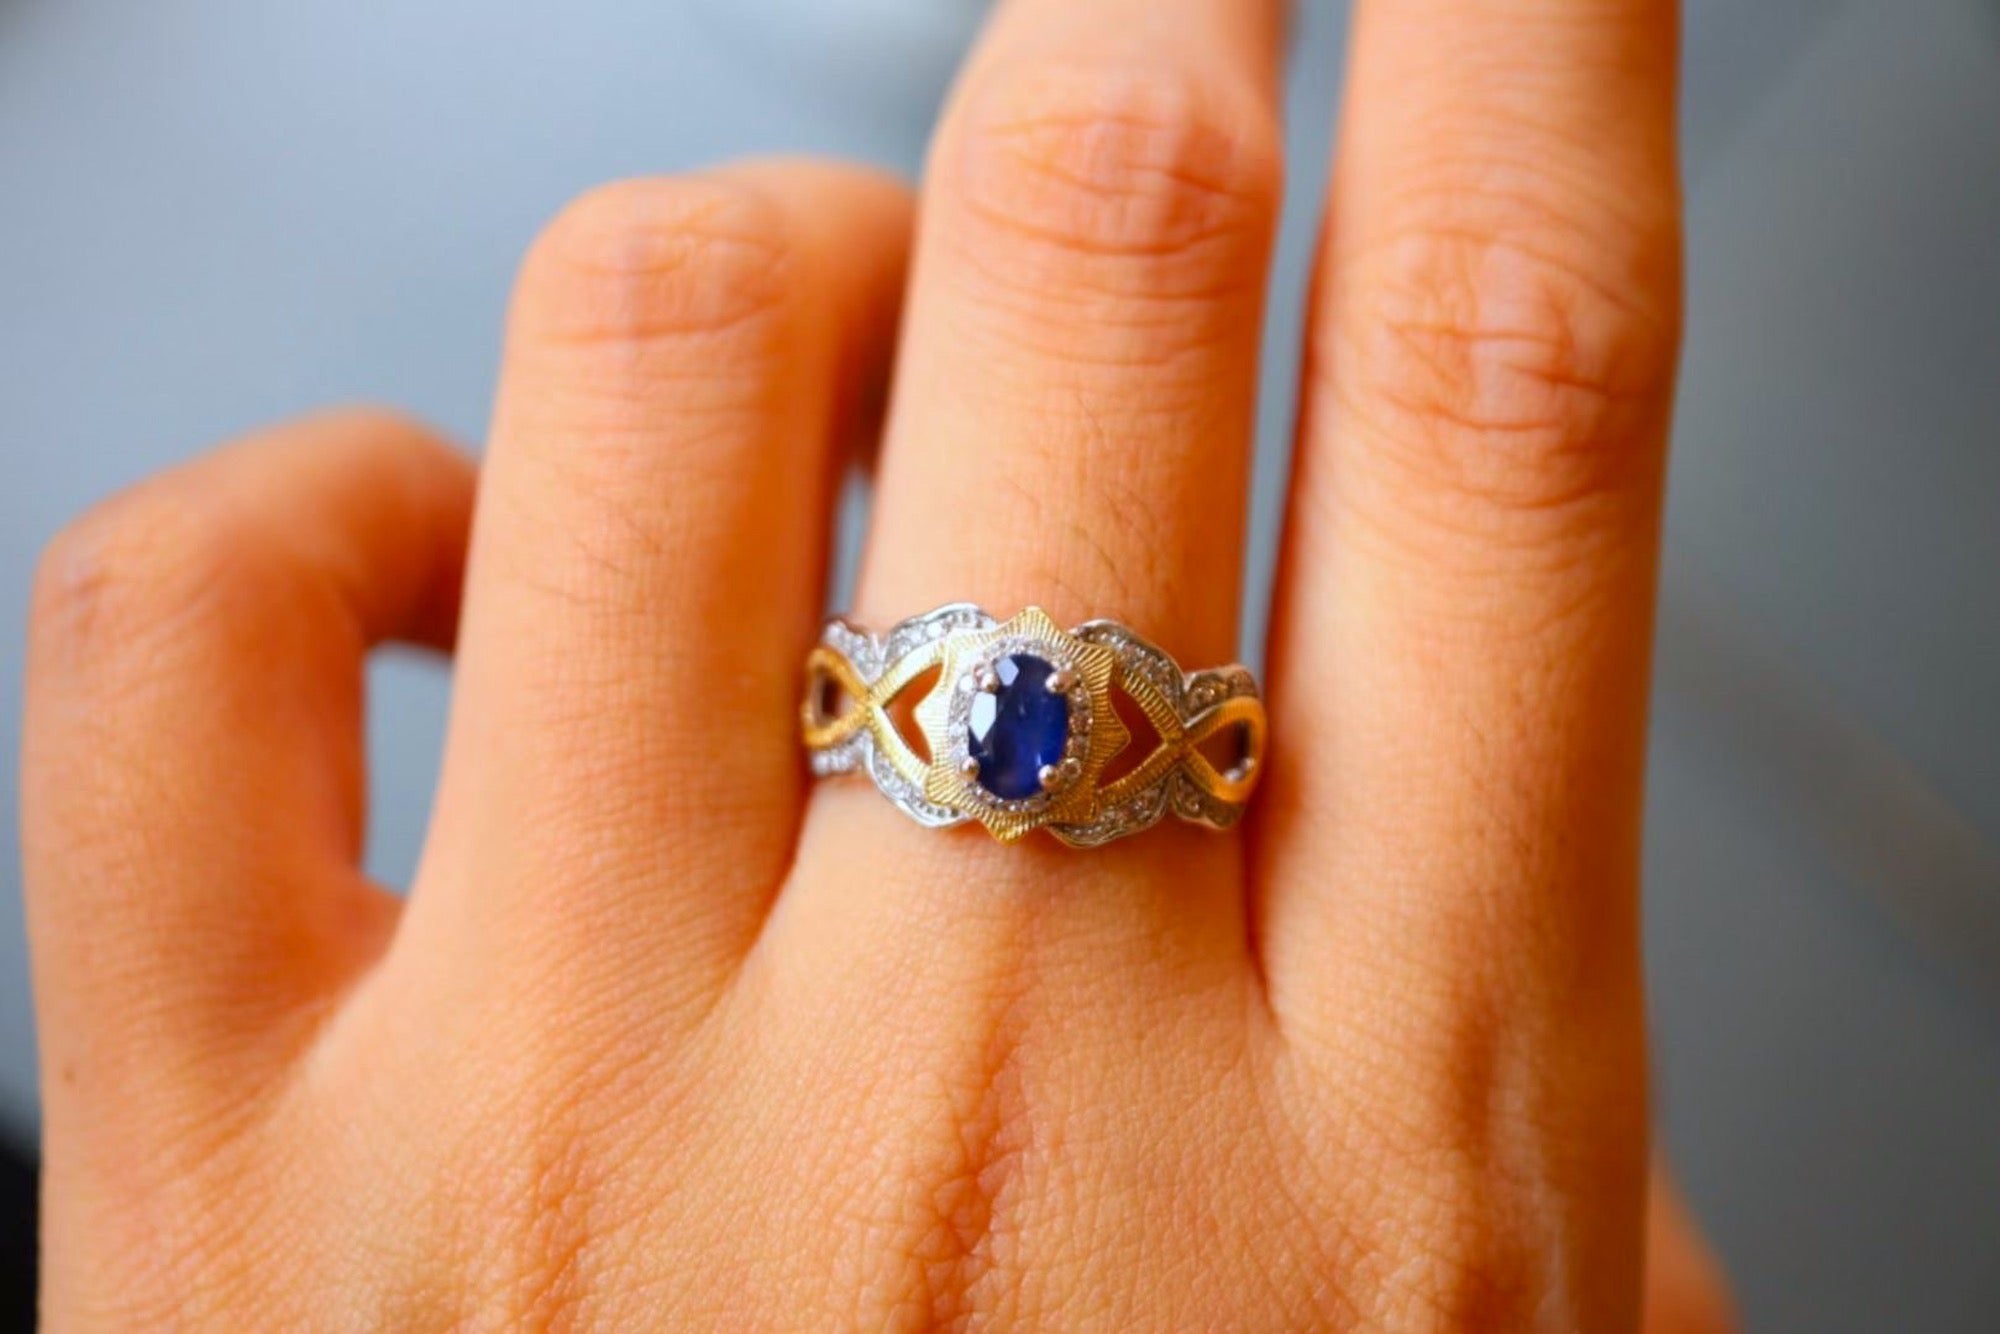 Sapphire Crown - Gold vermeil fancy Sapphire ring with royal frame - adjustable - Real Sapphire gemstones